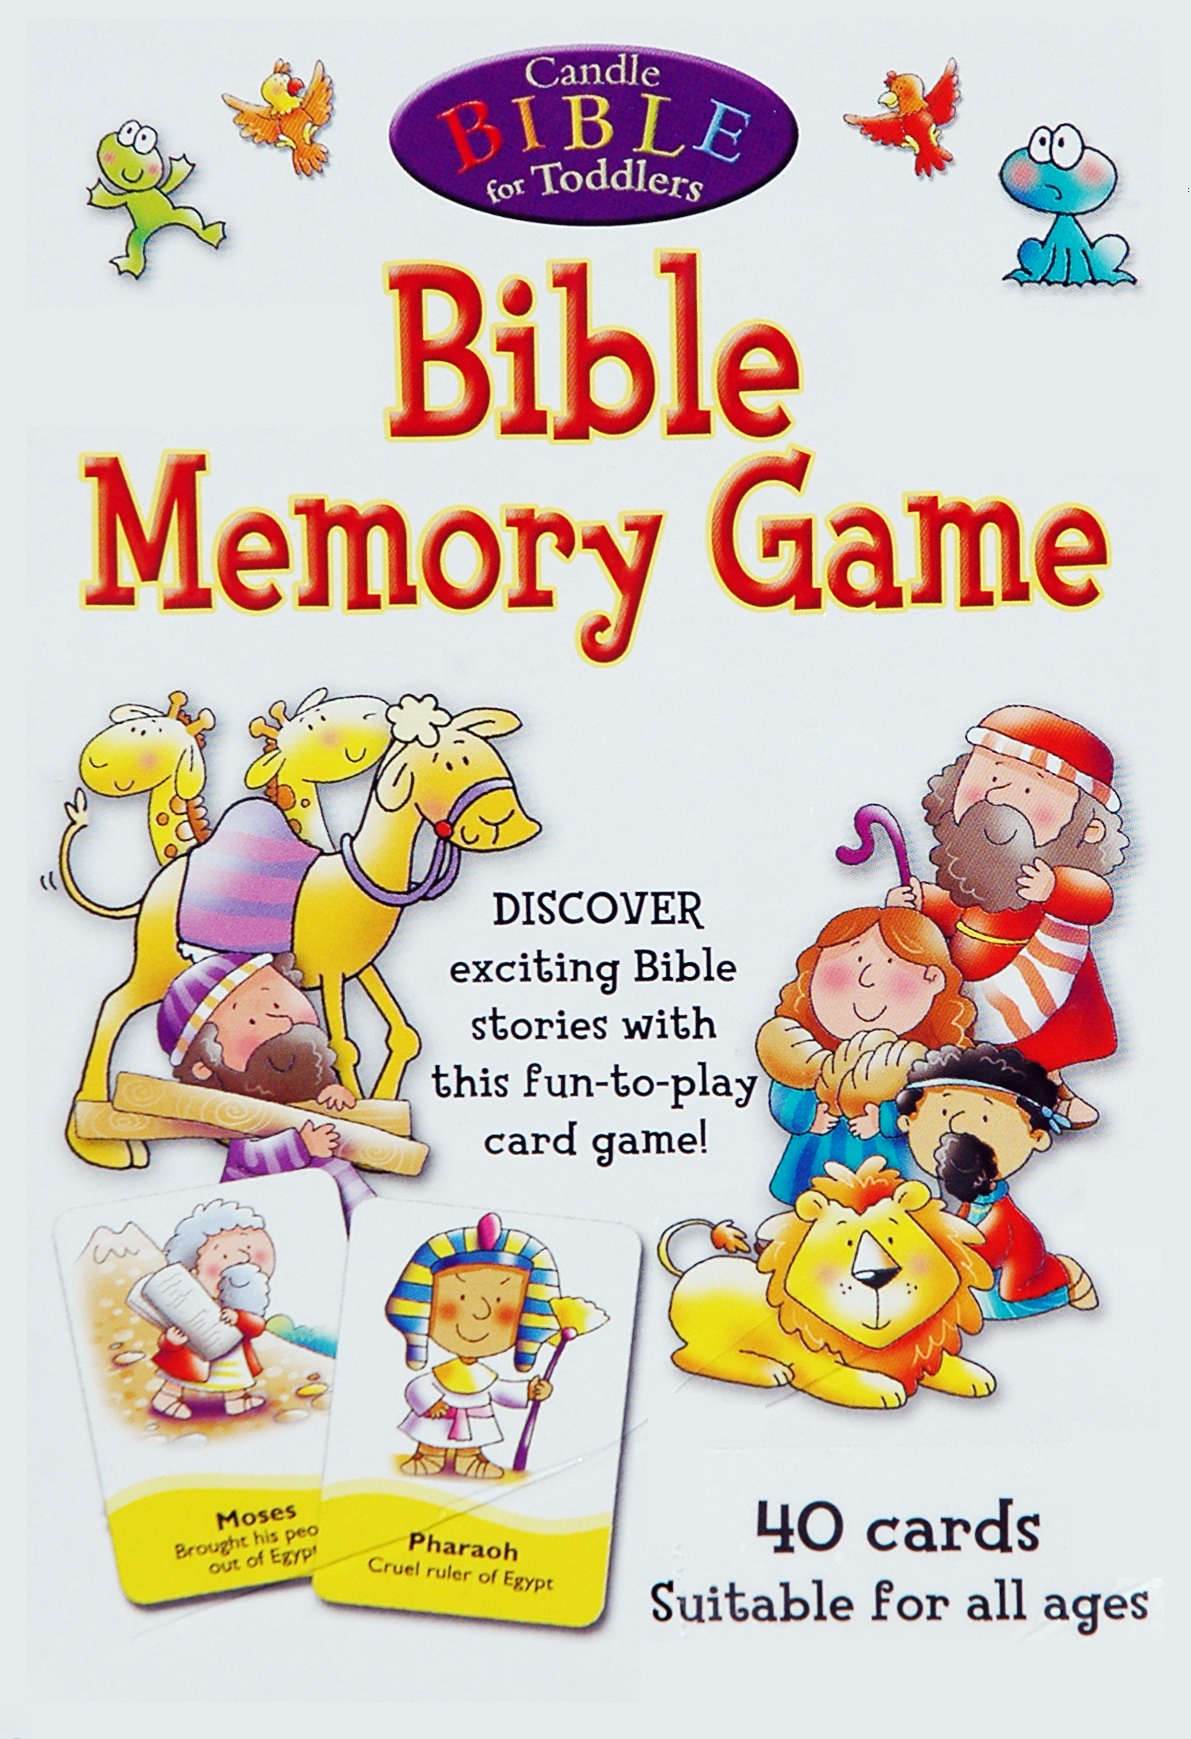 Candle Bible for Toddlers Bible Memory Game